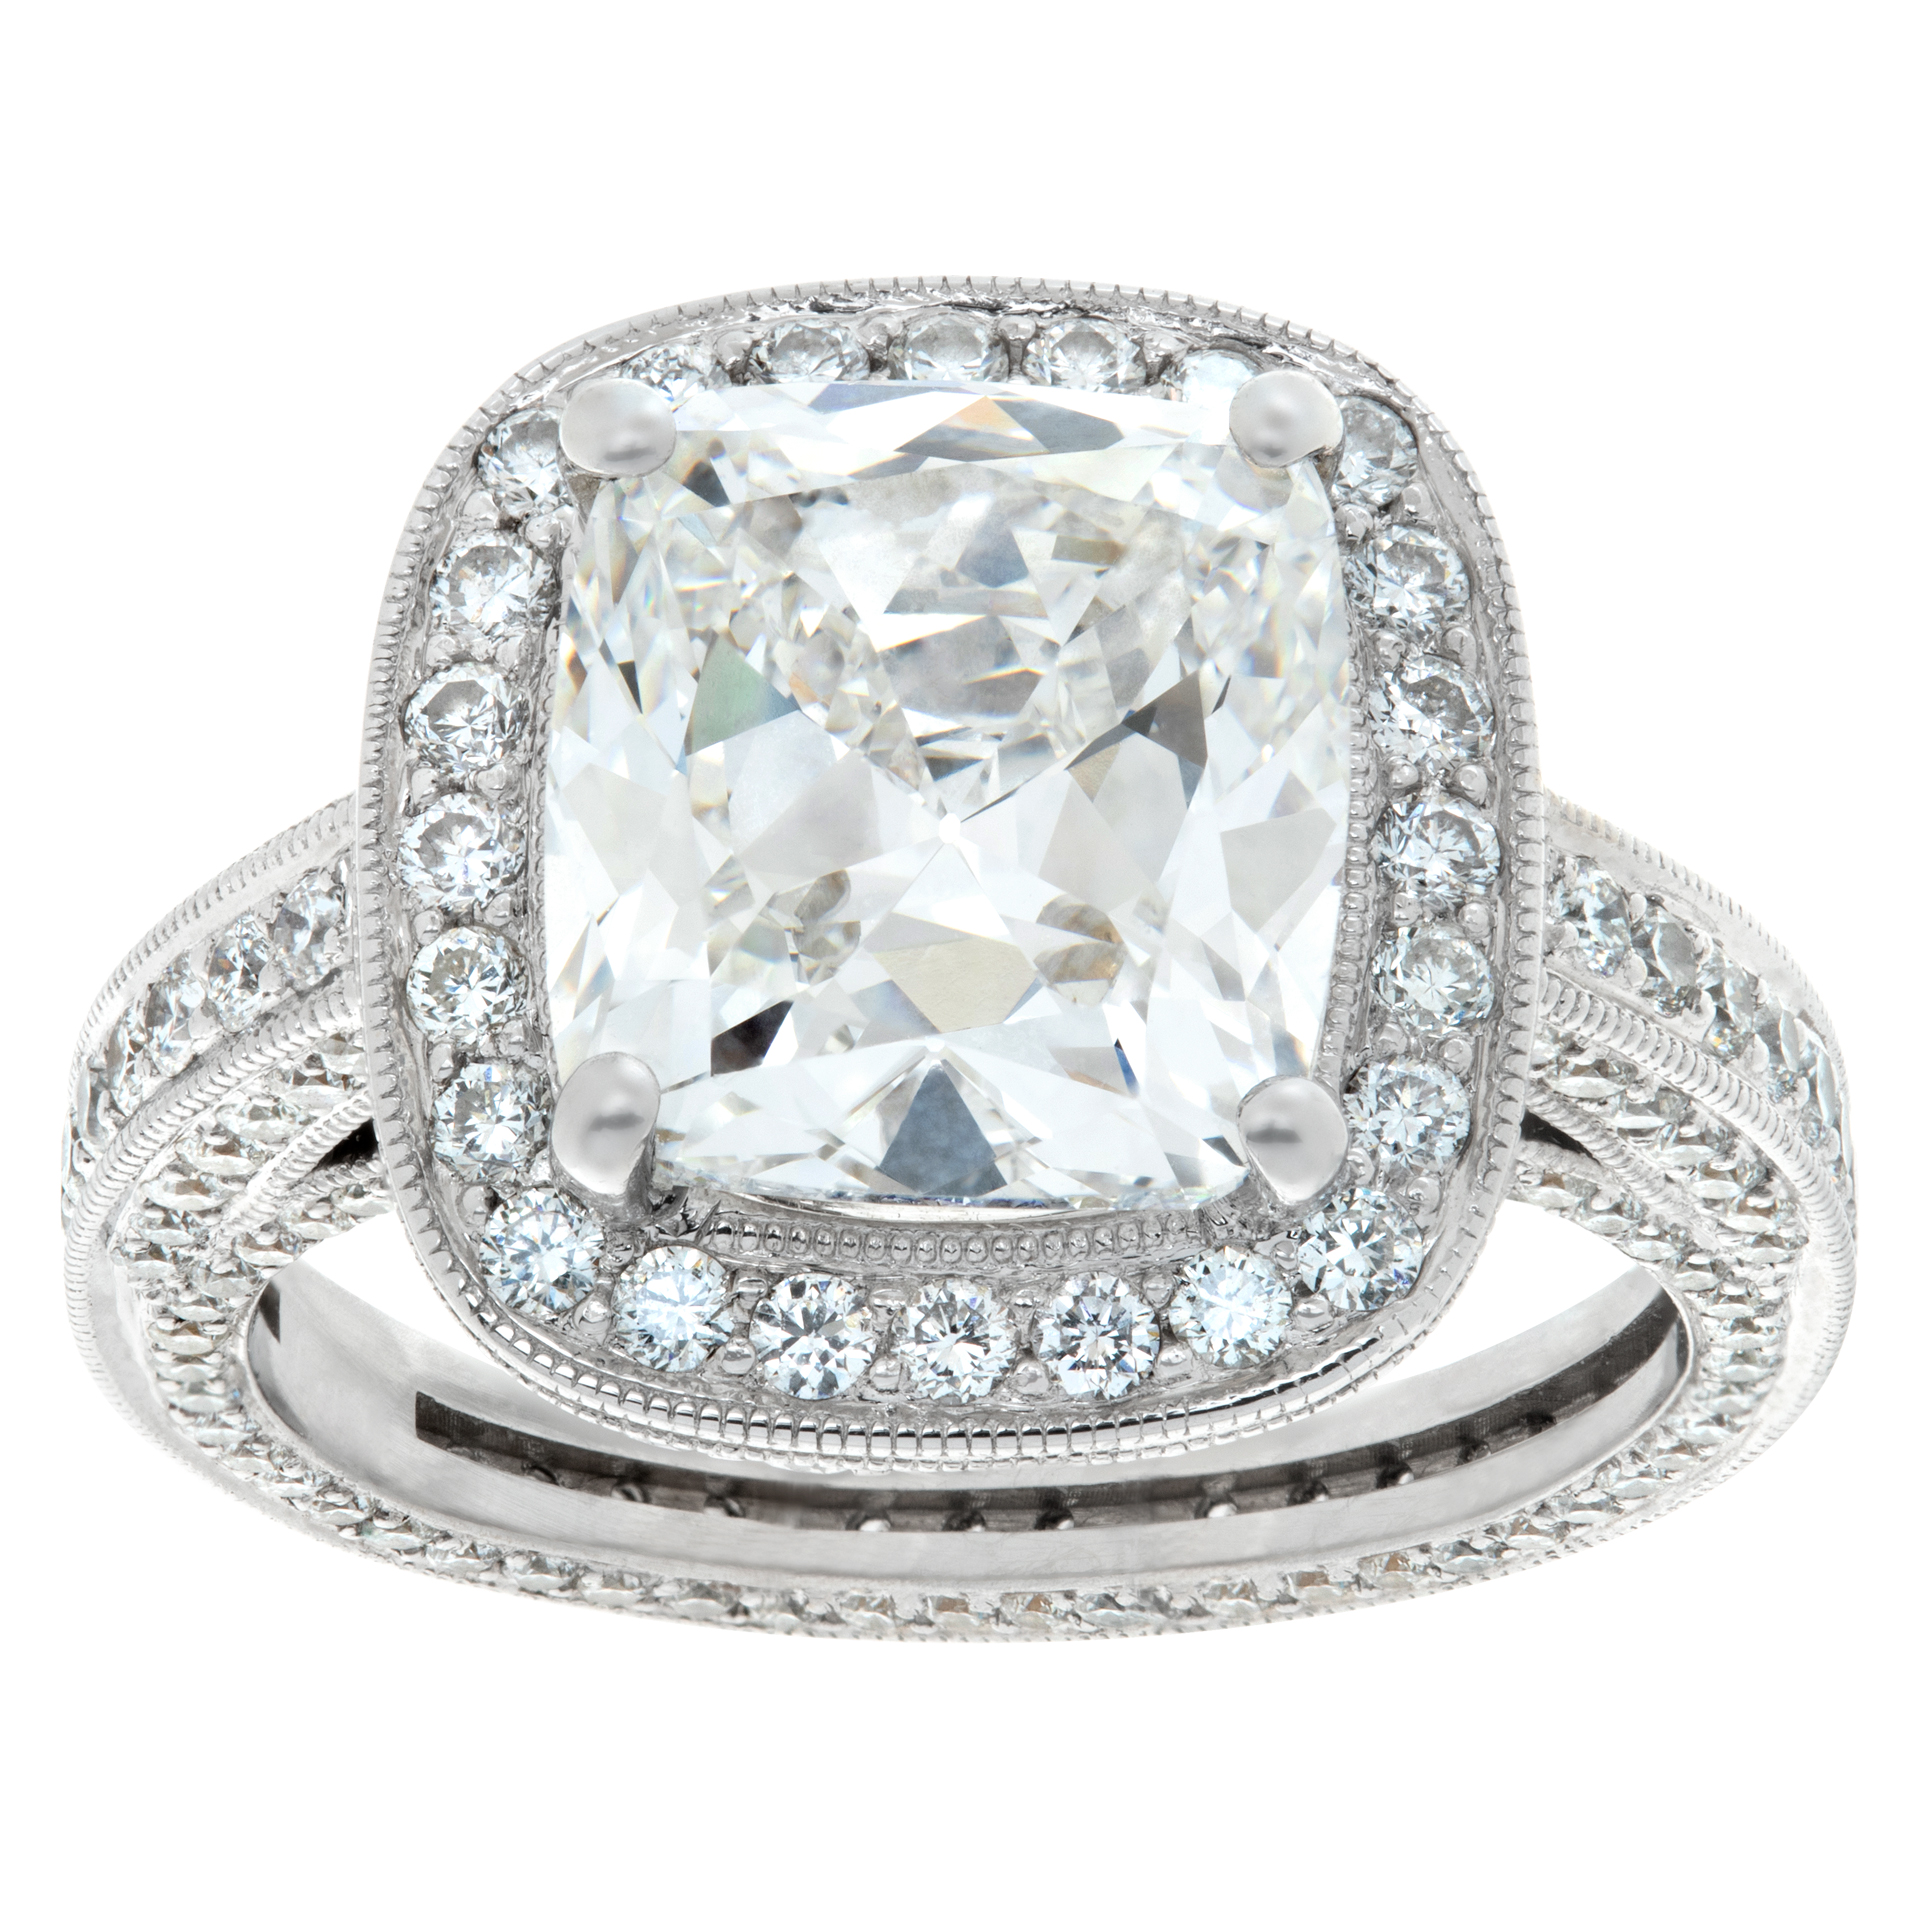 GIA certified cushion modified brilliant cut diamond 5.17 carat ( G color, SI2 clarity) ring